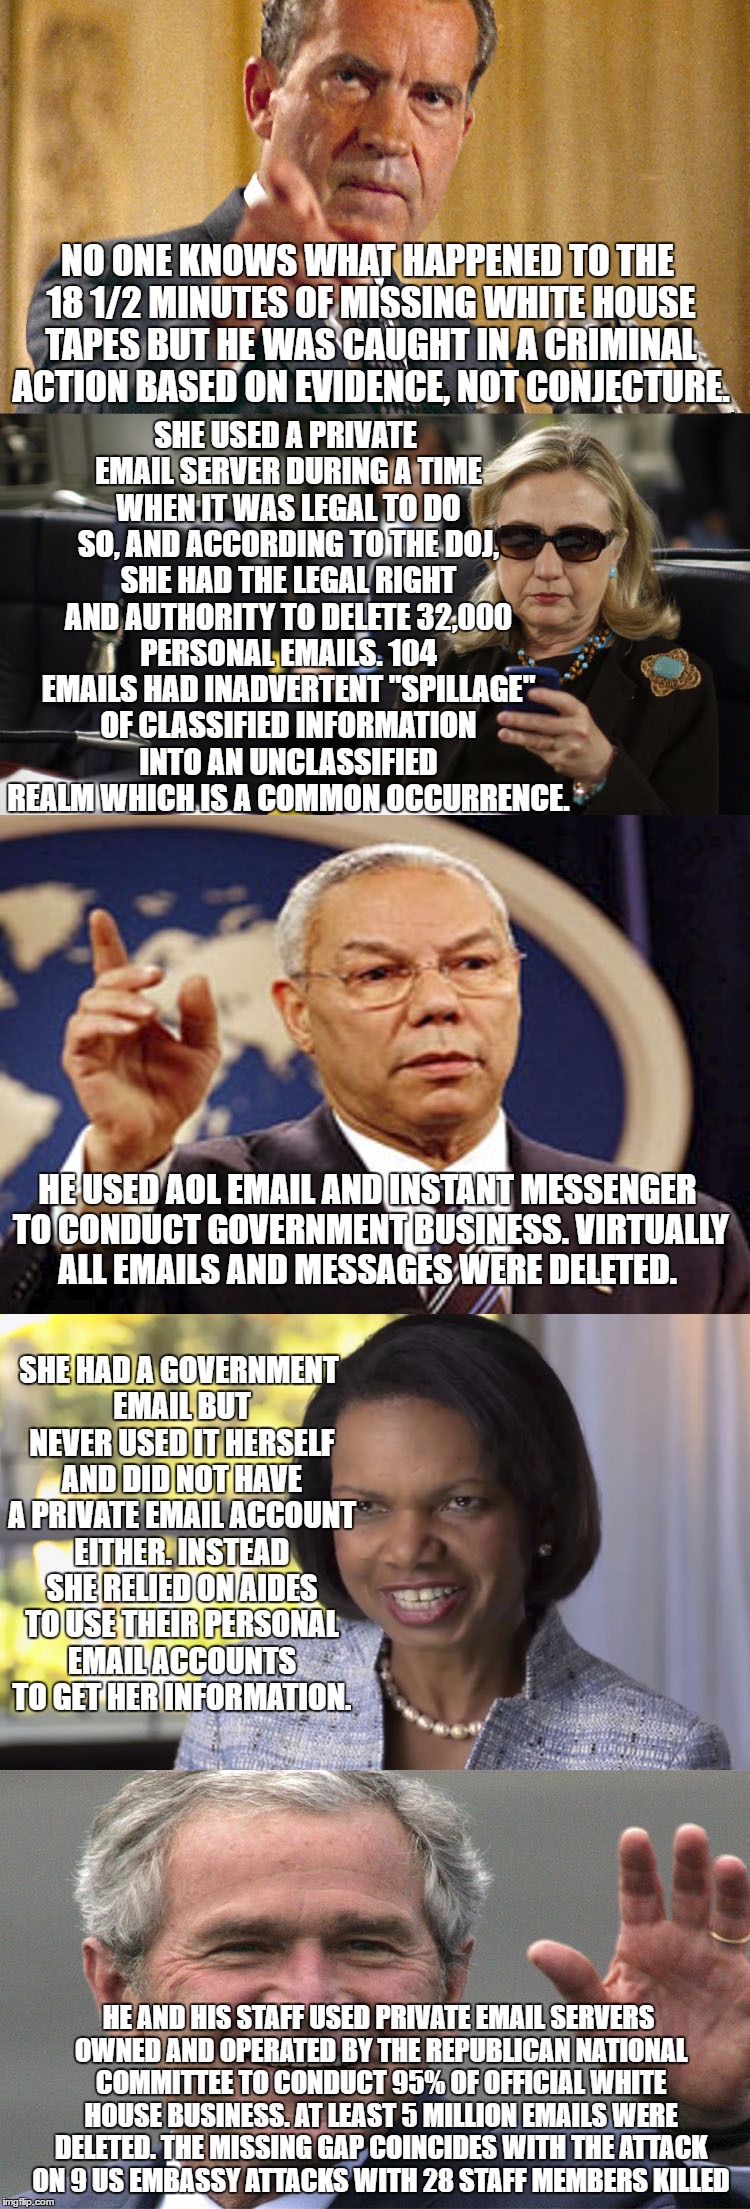 SHE USED A PRIVATE EMAIL SERVER DURING A TIME WHEN IT WAS LEGAL TO DO SO, AND ACCORDING TO THE DOJ, SHE HAD THE LEGAL RIGHT AND AUTHORITY TO DELETE 32,000 PERSONAL EMAILS. 104 EMAILS HAD INADVERTENT "SPILLAGE" OF CLASSIFIED INFORMATION INTO AN UNCLASSIFIED REALM WHICH IS A COMMON OCCURRENCE. NO ONE KNOWS WHAT HAPPENED TO THE 18 1/2 MINUTES OF MISSING WHITE HOUSE TAPES BUT HE WAS CAUGHT IN A CRIMINAL ACTION BASED ON EVIDENCE, NOT CONJECTURE. HE USED AOL EMAIL AND INSTANT MESSENGER TO CONDUCT GOVERNMENT BUSINESS. VIRTUALLY ALL EMAILS AND MESSAGES WERE DELETED. SHE HAD A GOVERNMENT EMAIL BUT NEVER USED IT HERSELF AND DID NOT HAVE A PRIVATE EMAIL ACCOUNT EITHER. INSTEAD SHE RELIED ON AIDES TO USE THEIR PERSONAL EMAIL ACCOUNTS TO GET HER INFORMATION. HE AND HIS STAFF USED PRIVATE EMAIL SERVERS OWNED AND OPERATED BY THE REPUBLICAN NATIONAL COMMITTEE TO CONDUCT 95% OF OFFICIAL WHITE HOUSE BUSINESS. AT LEAST 5 MILLION EMAILS WERE DELETED. THE MISSING GAP COINCIDES WITH THE ATTACK ON 9 US EMBASSY ATTACKS WITH 28 STAFF MEMBERS KILLED | image tagged in deletion | made w/ Imgflip meme maker